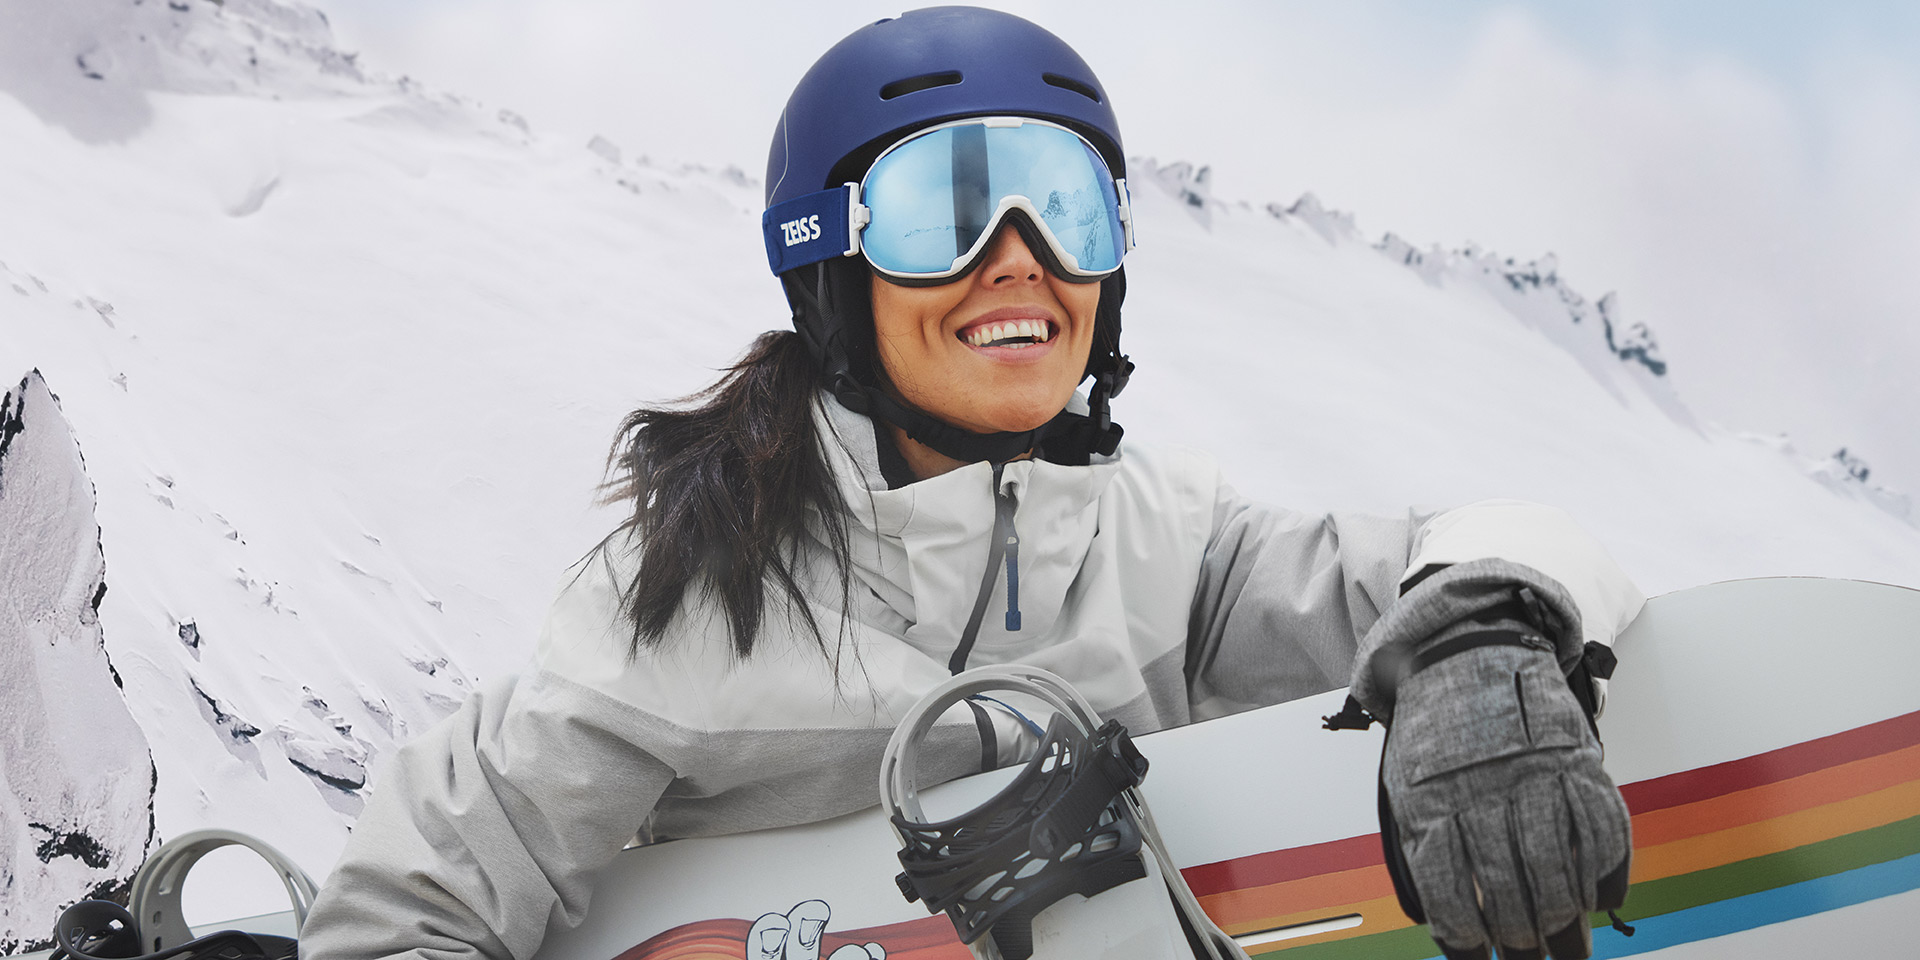 https://www.zeiss.com/content/dam/vis-b2c/reference-master/images/products/snow-goggles/zeiss-snow-women-stage.jpg